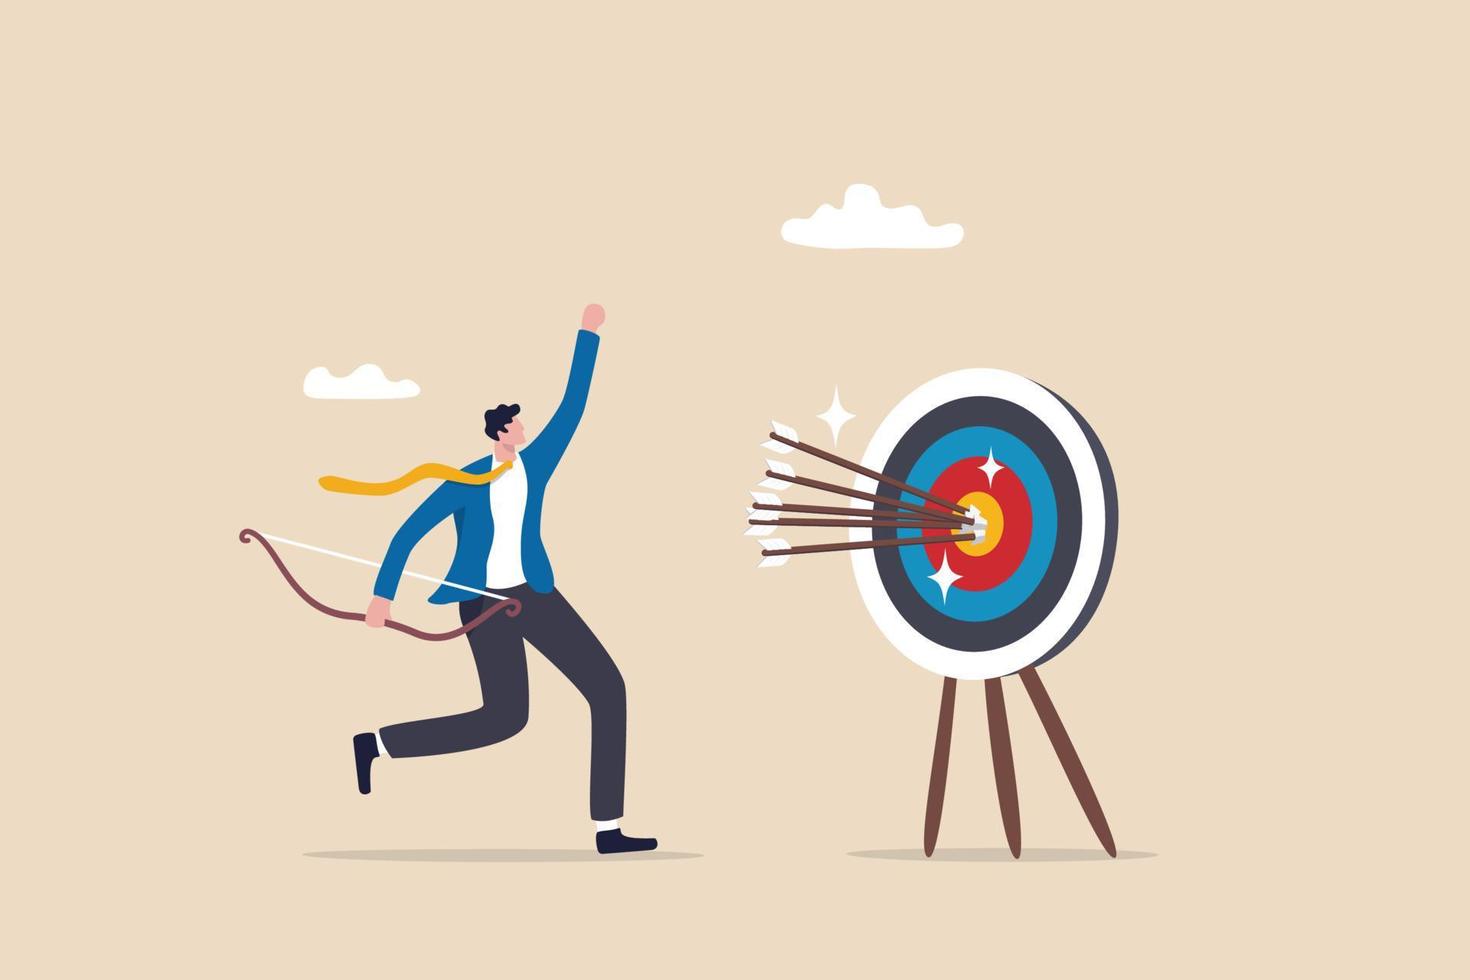 Success reaching goal or target, victory or winner, accuracy and achievement to hit target bullseye, efficiency or perfection concept, businessman archery shoot all his bows hitting bullseye target. vector